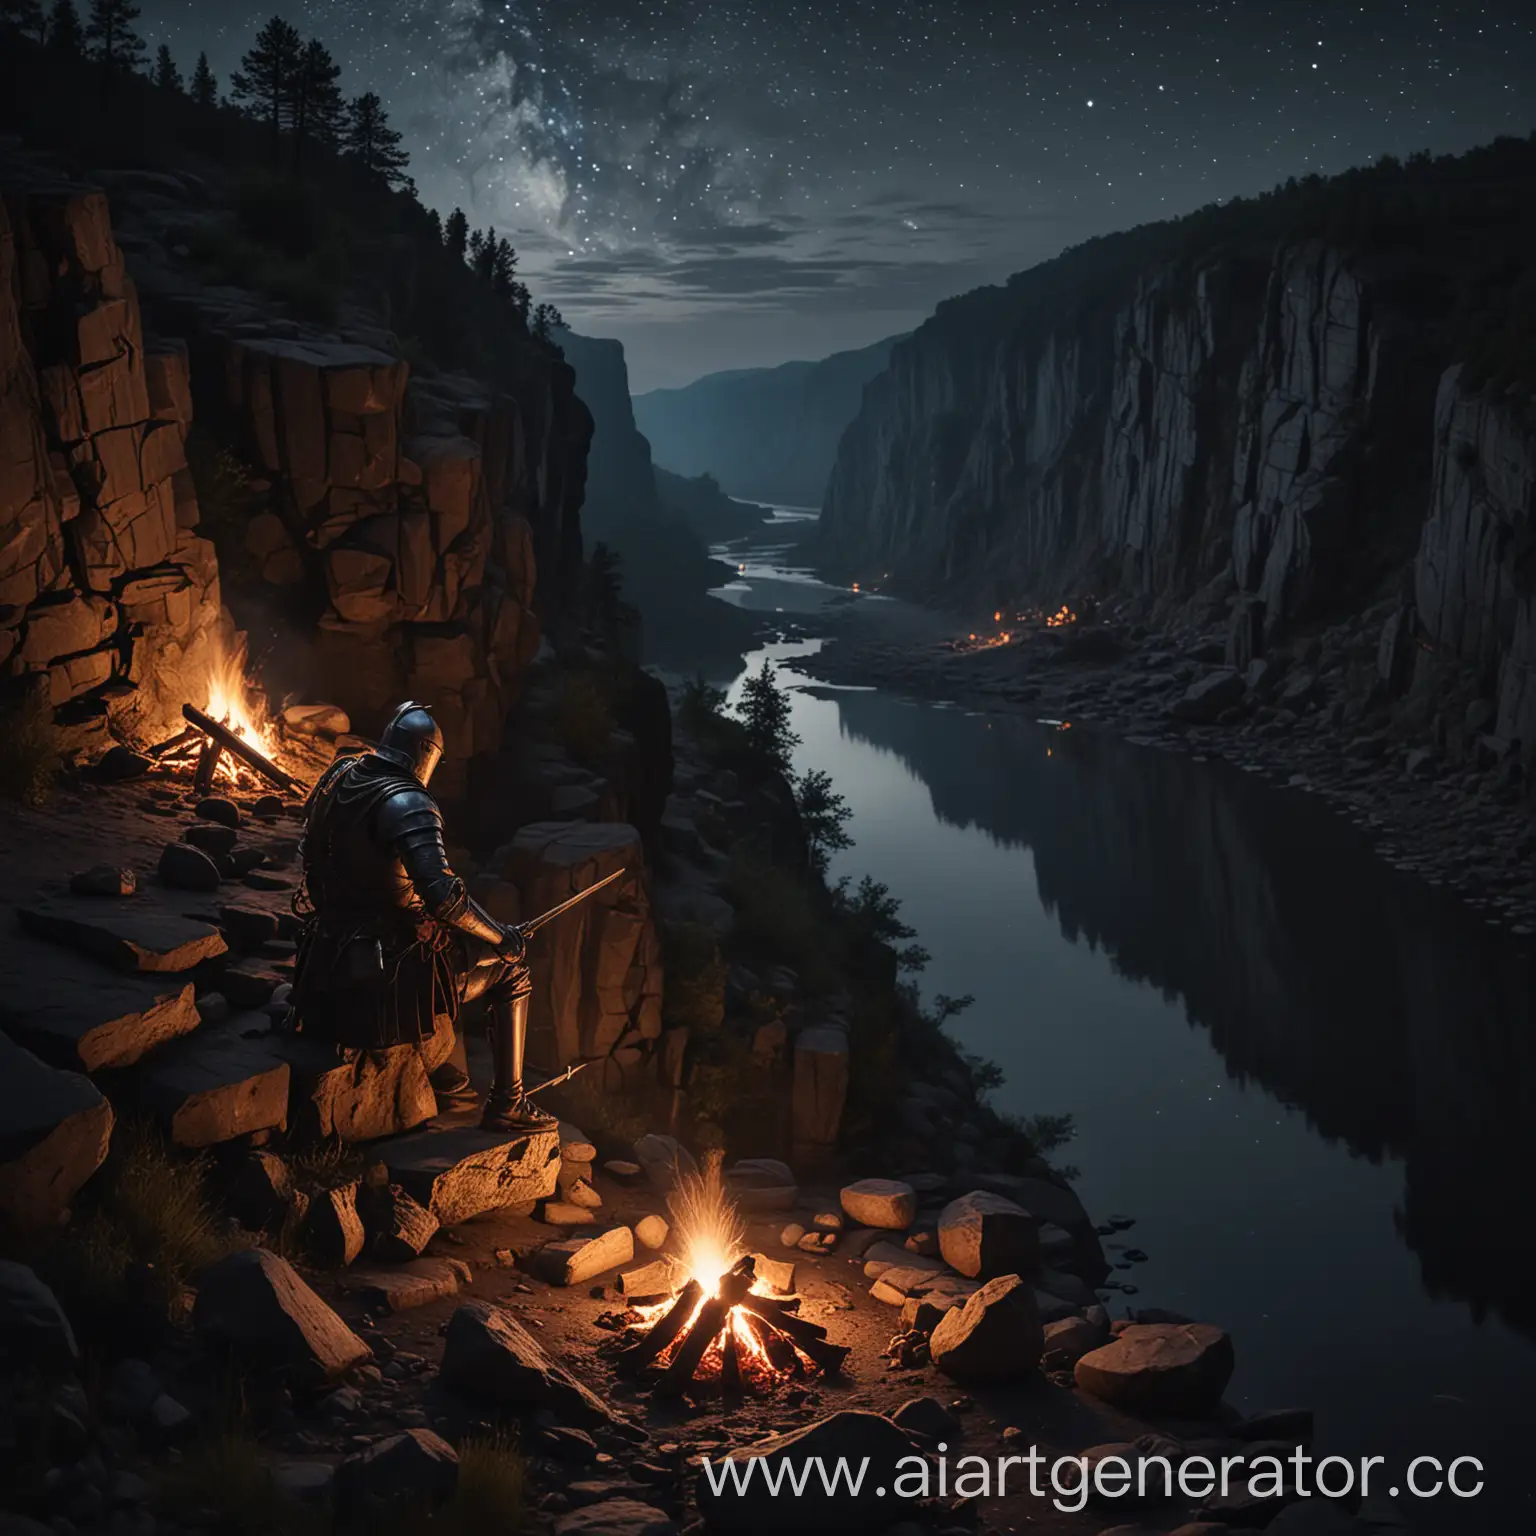 Knight-Sitting-by-Night-Campfire-on-Cliff-Overlooking-River